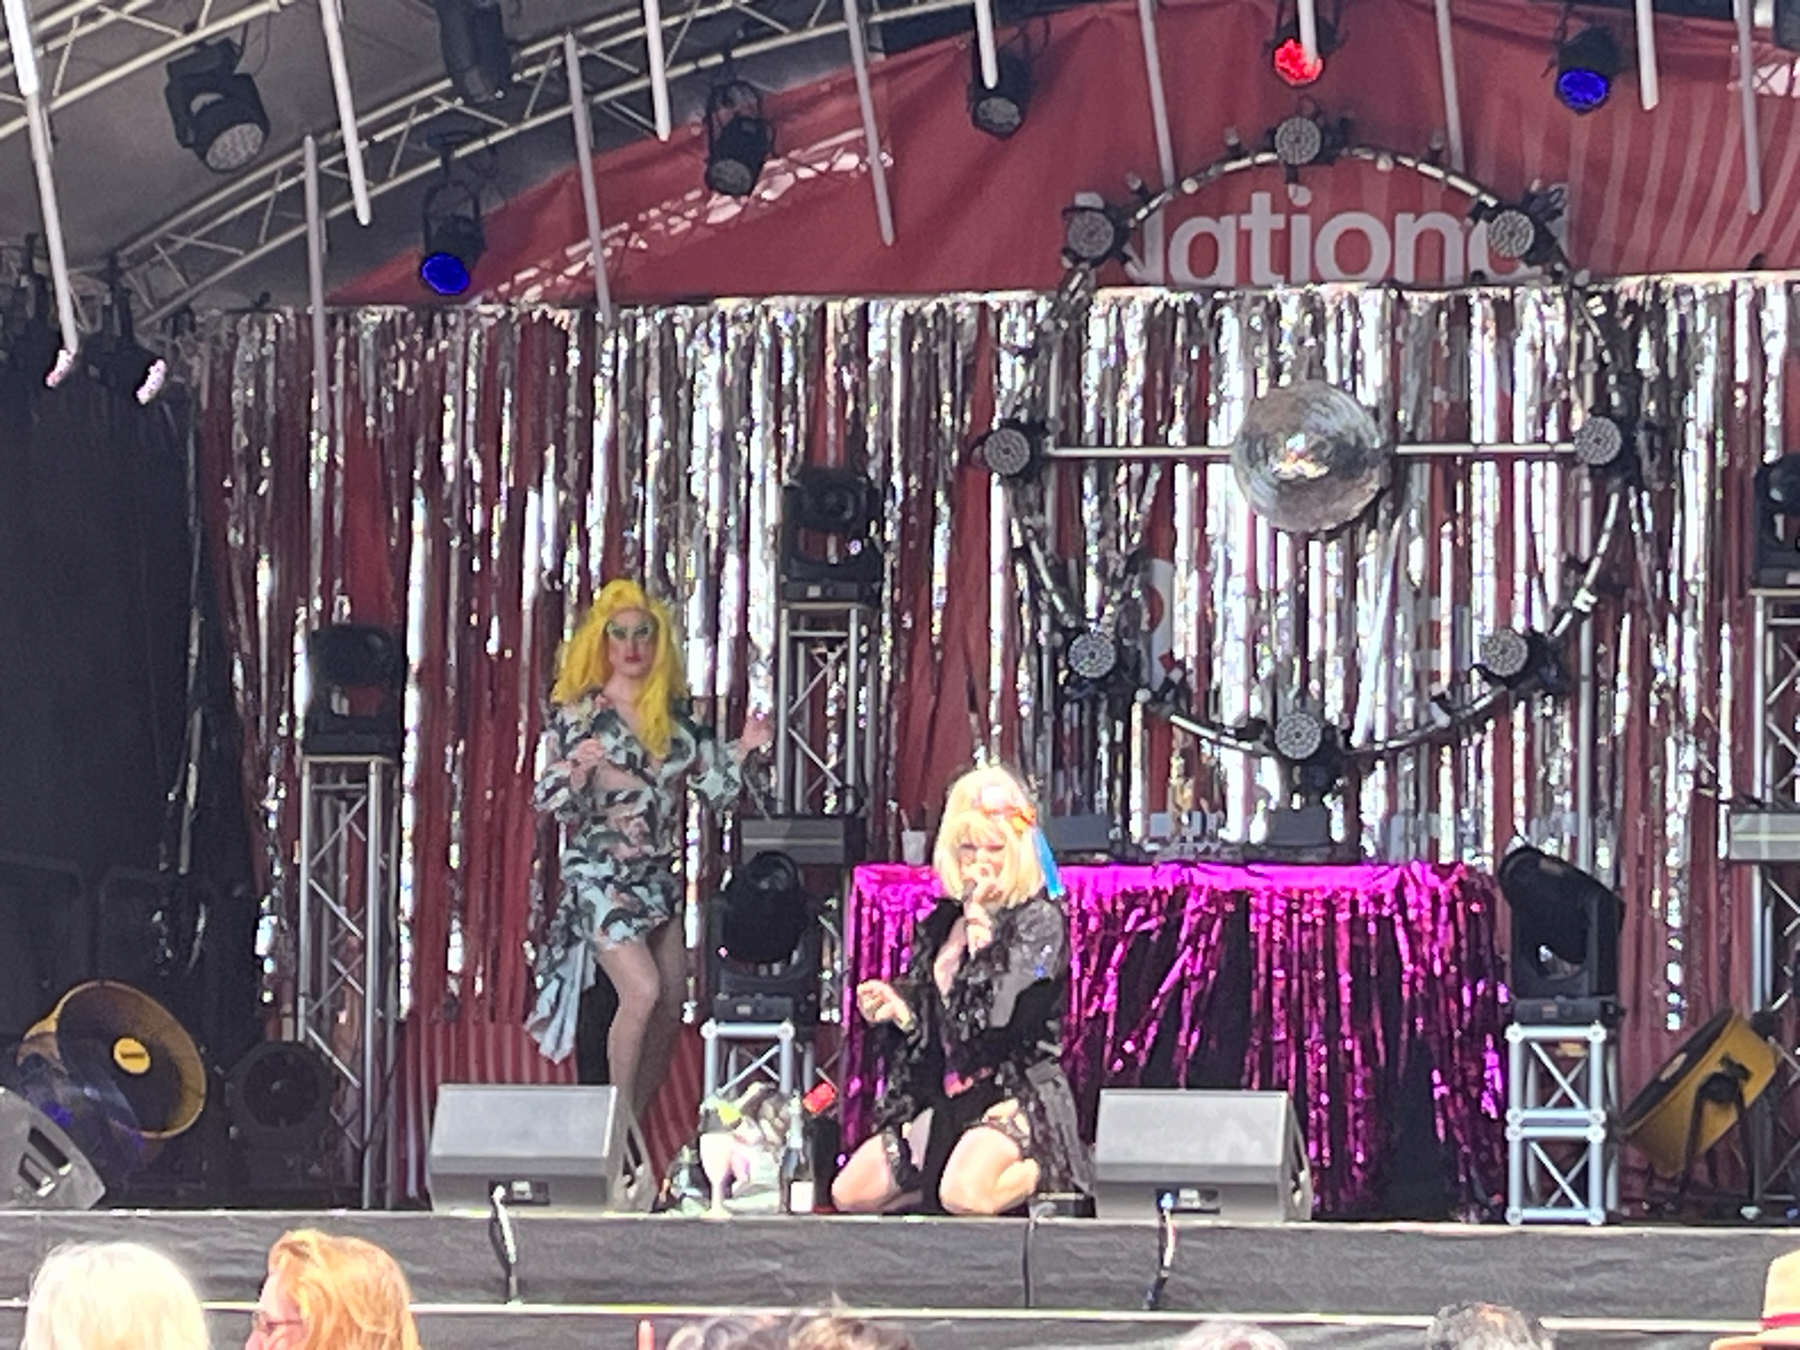 Drag queens performing on stage